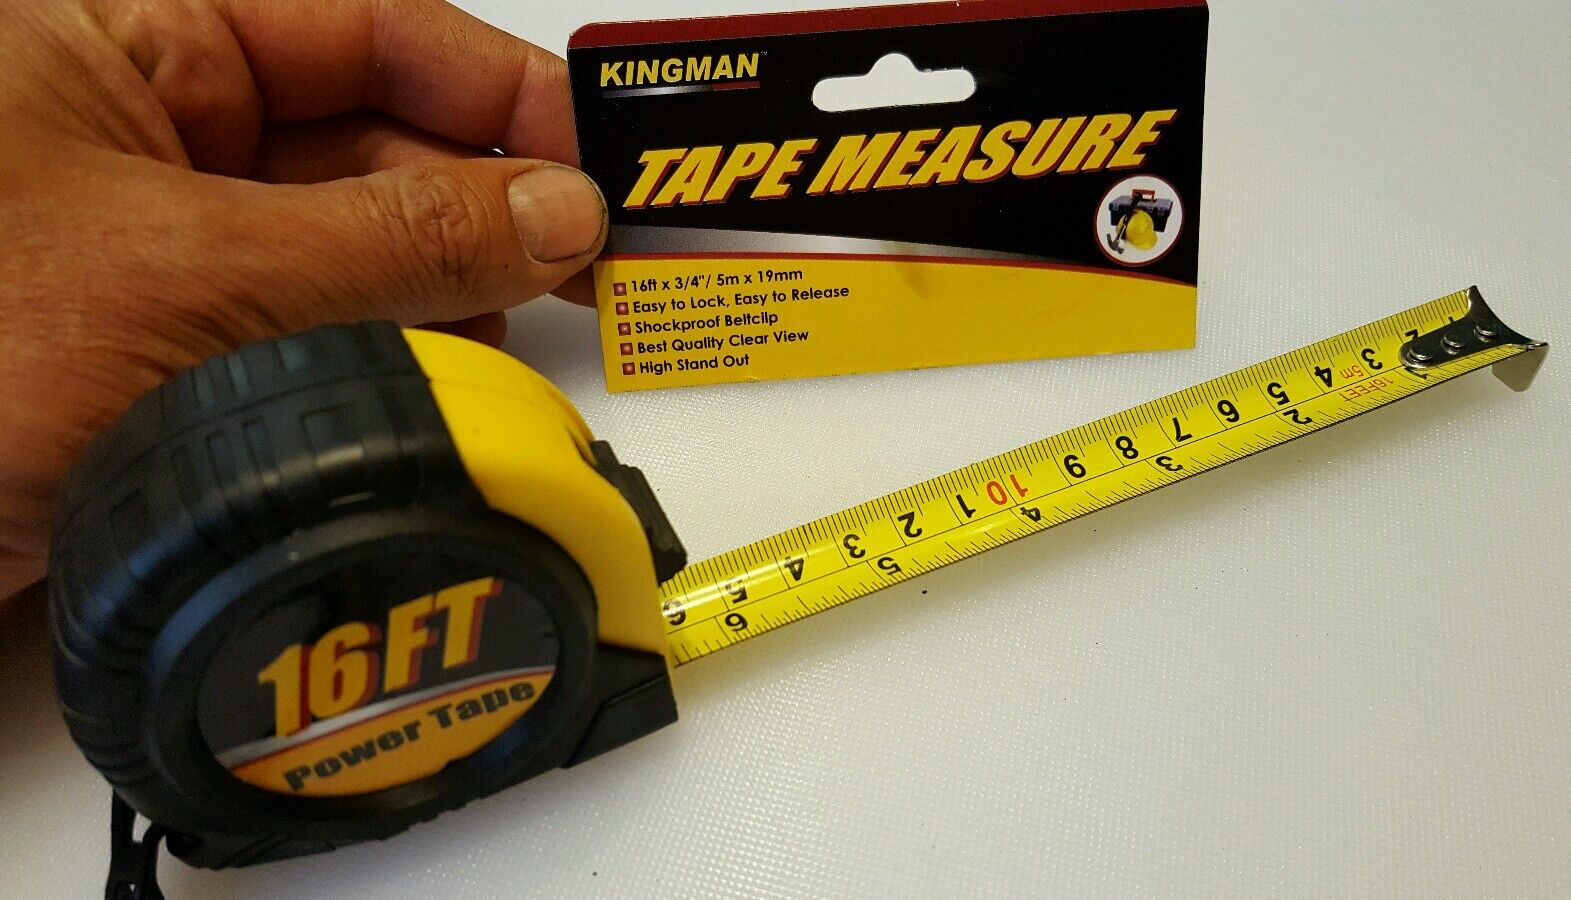 Measuring tape 16 ft x 3/4  inches and metric